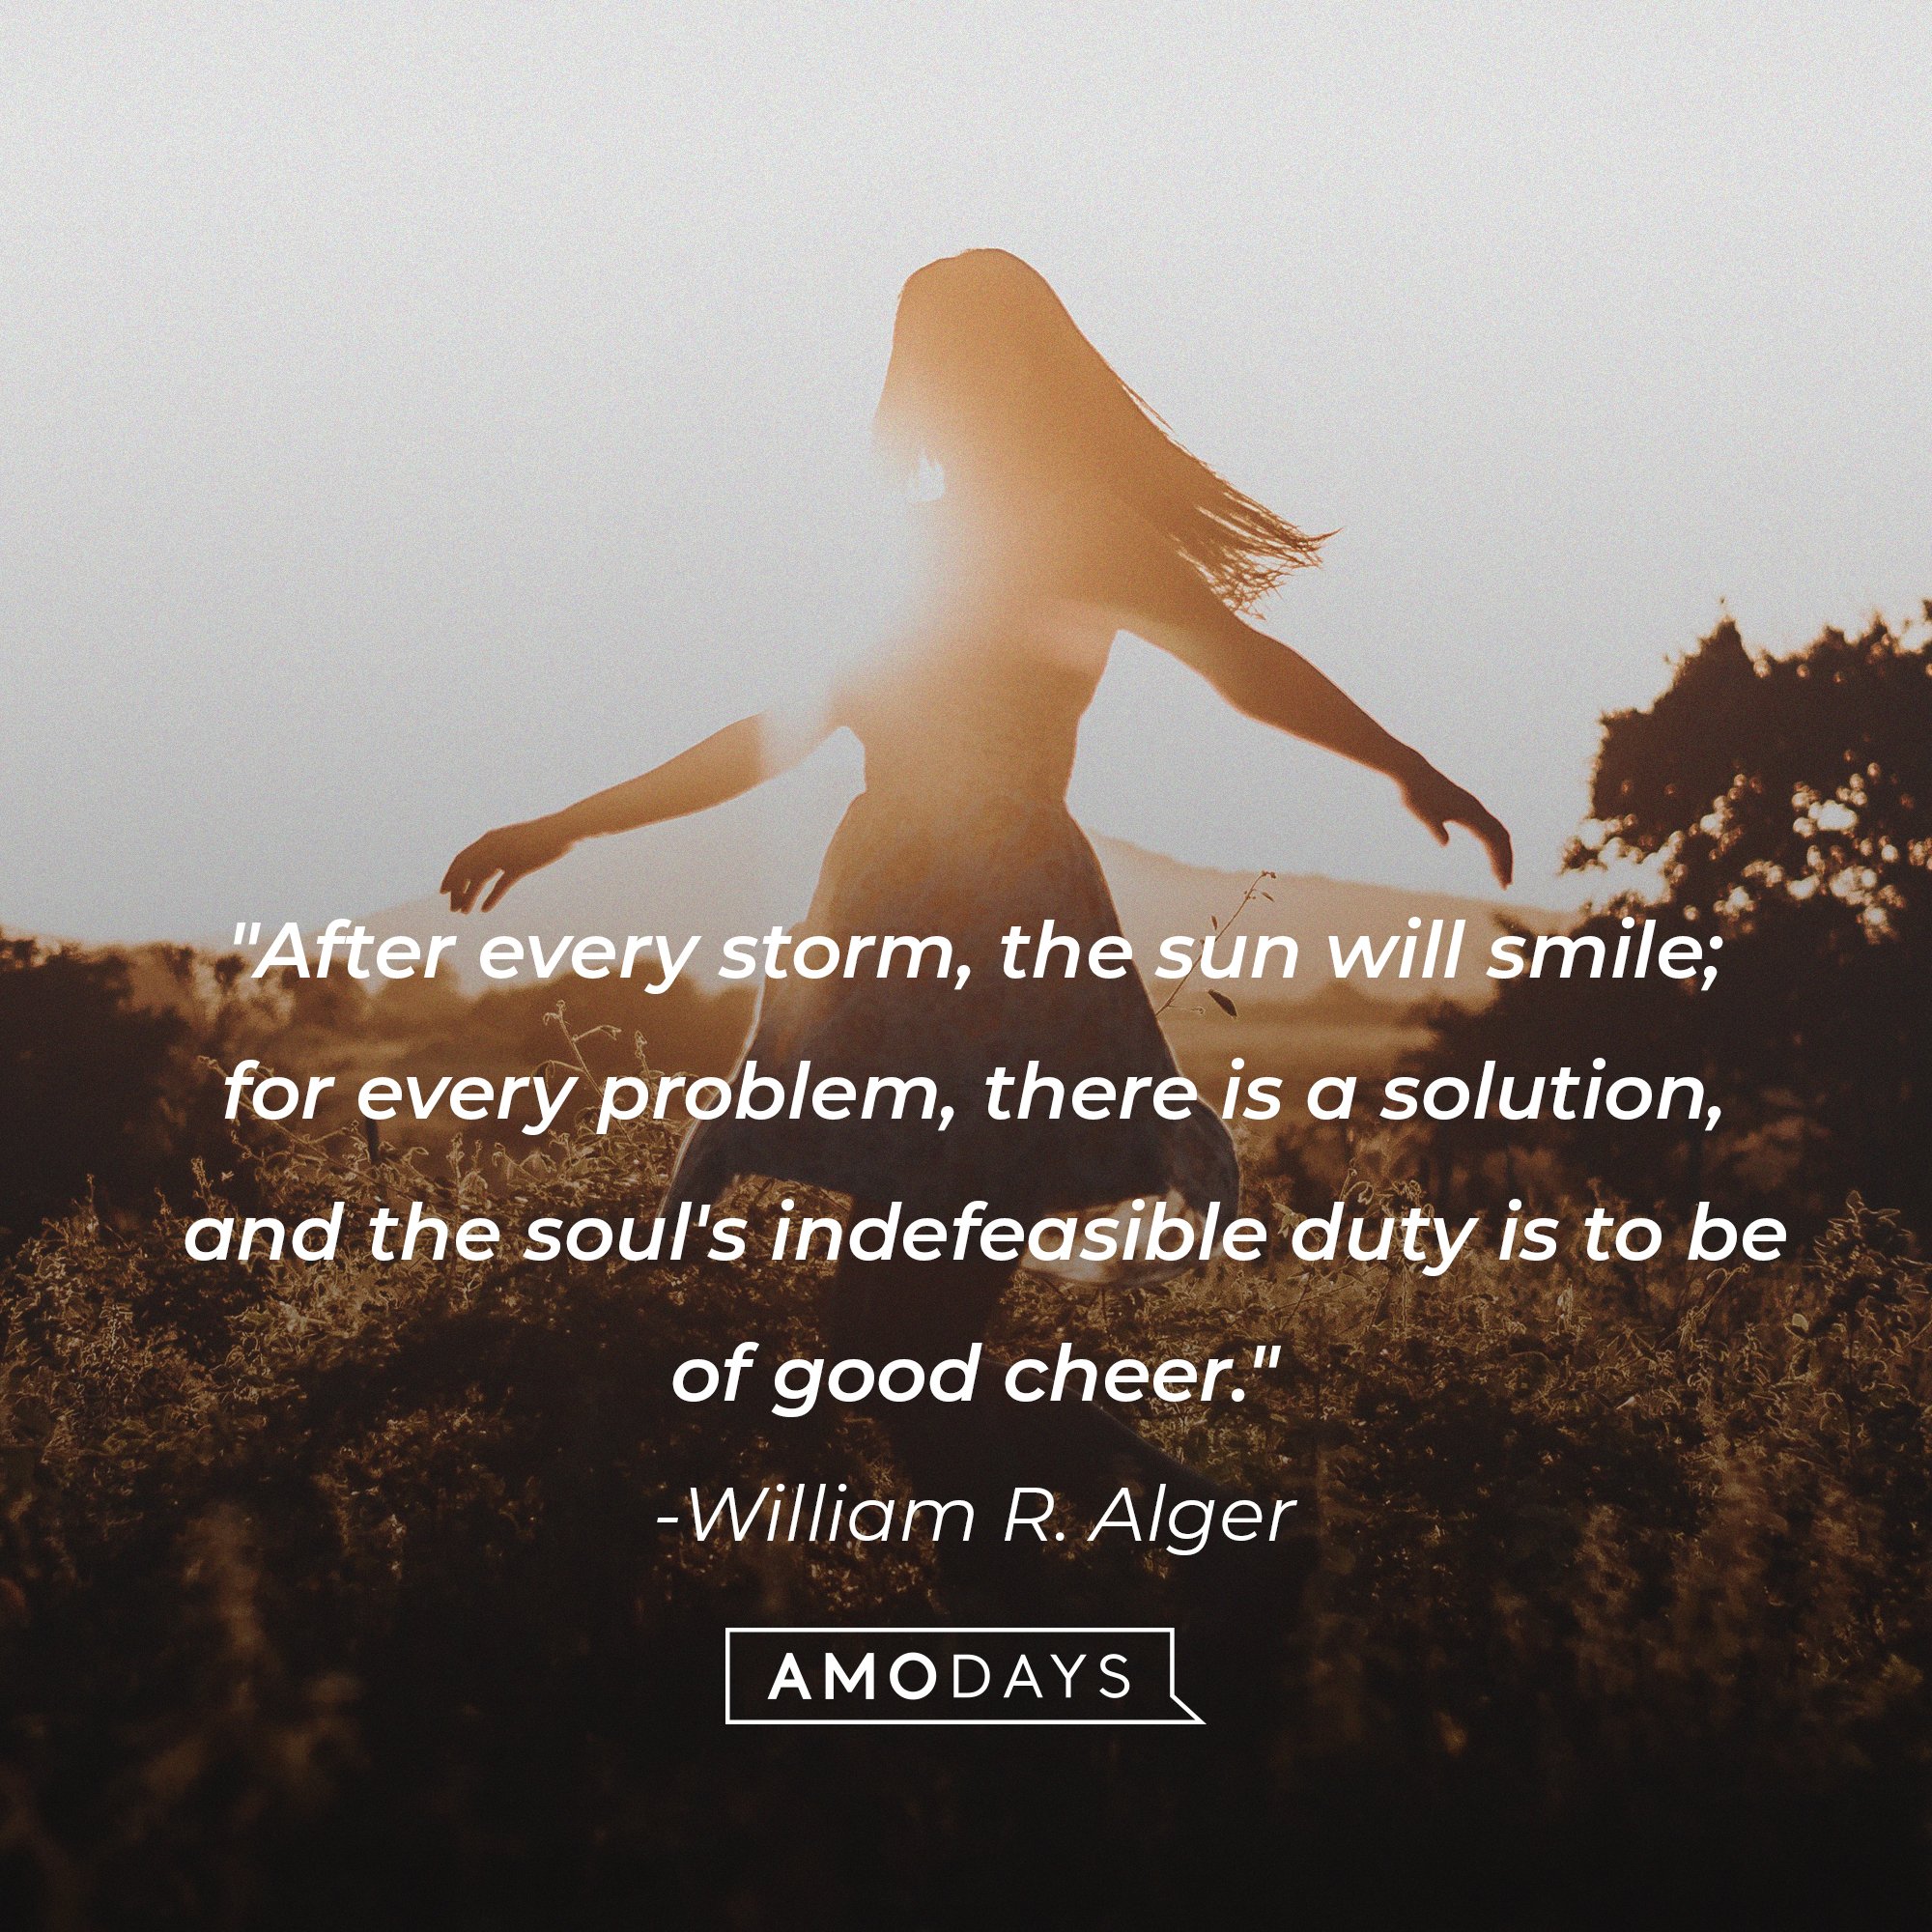 William R. Alger’s quote: After every storm the sun will smile; for every problem there is a solution, and the soul's indefeasible duty is to be of good cheer." | Image: AmoDays